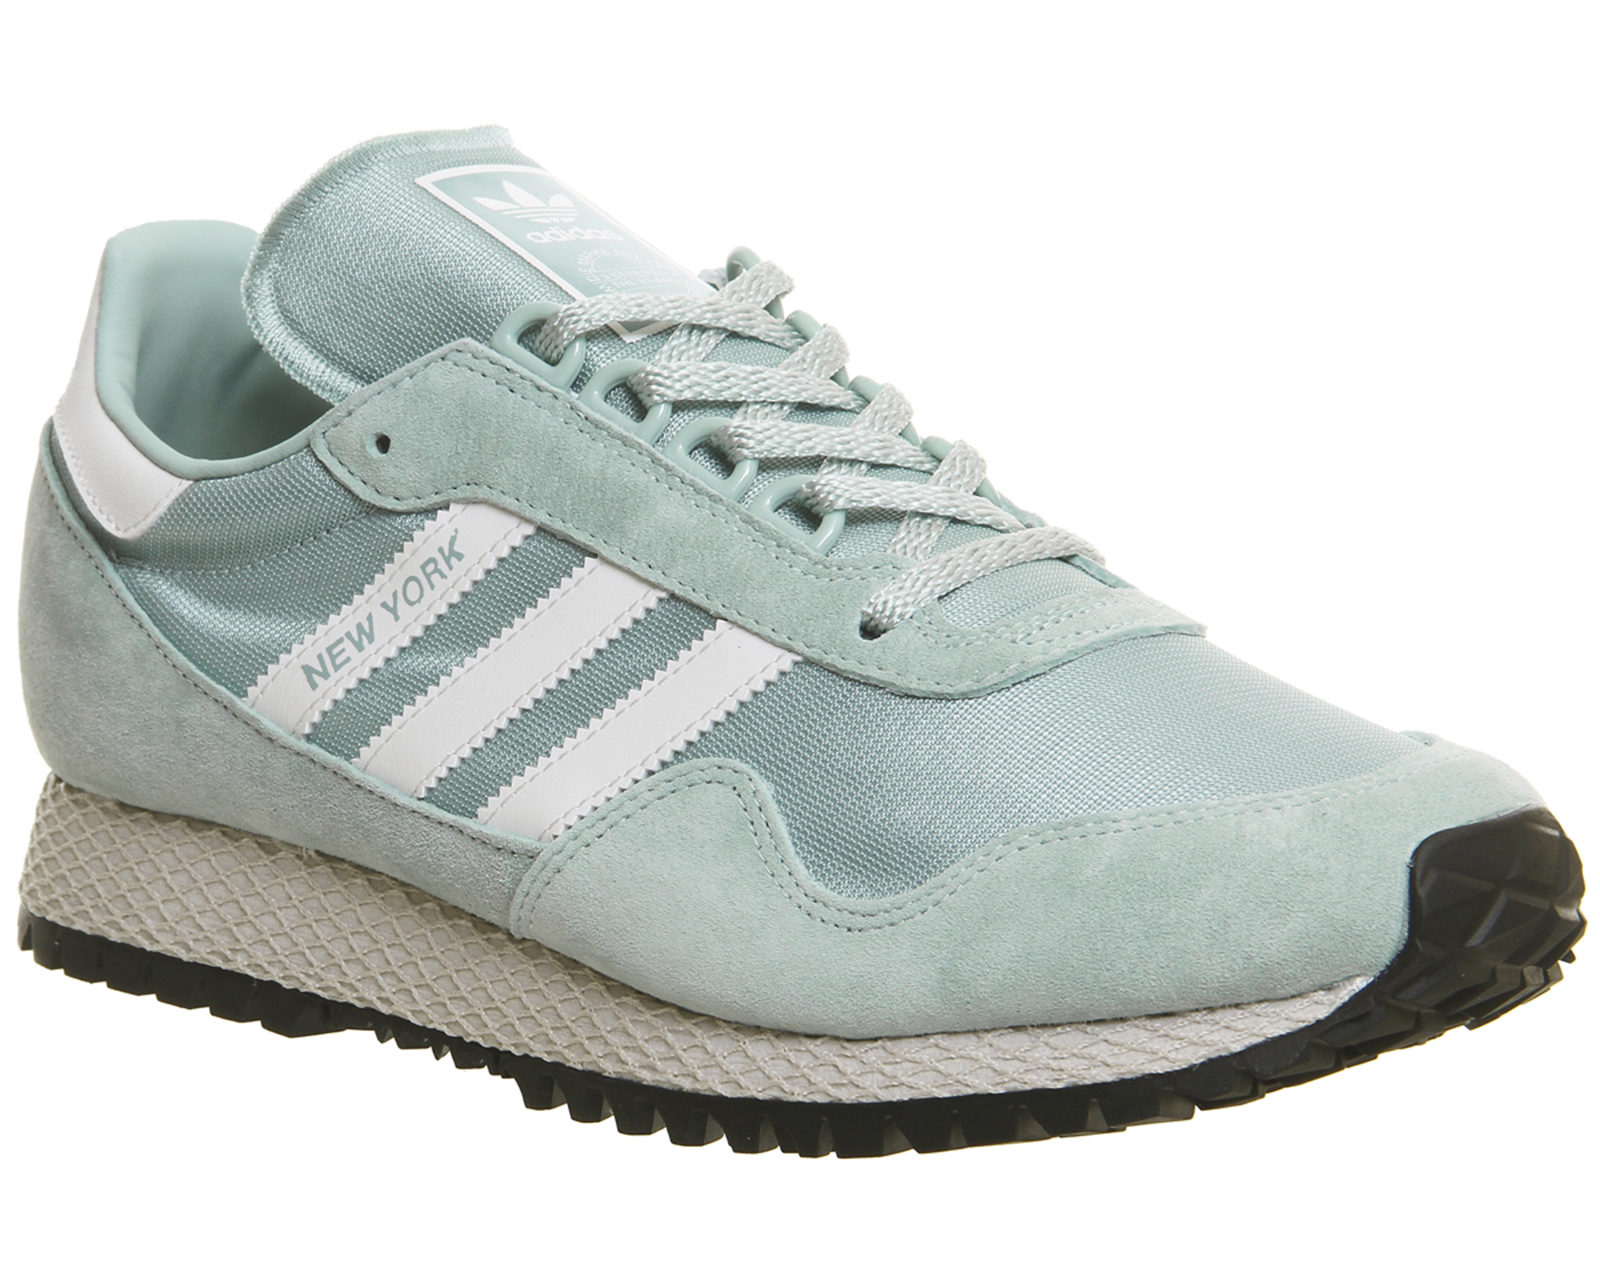 adidas New York Trainers Tactile Green White - His trainers